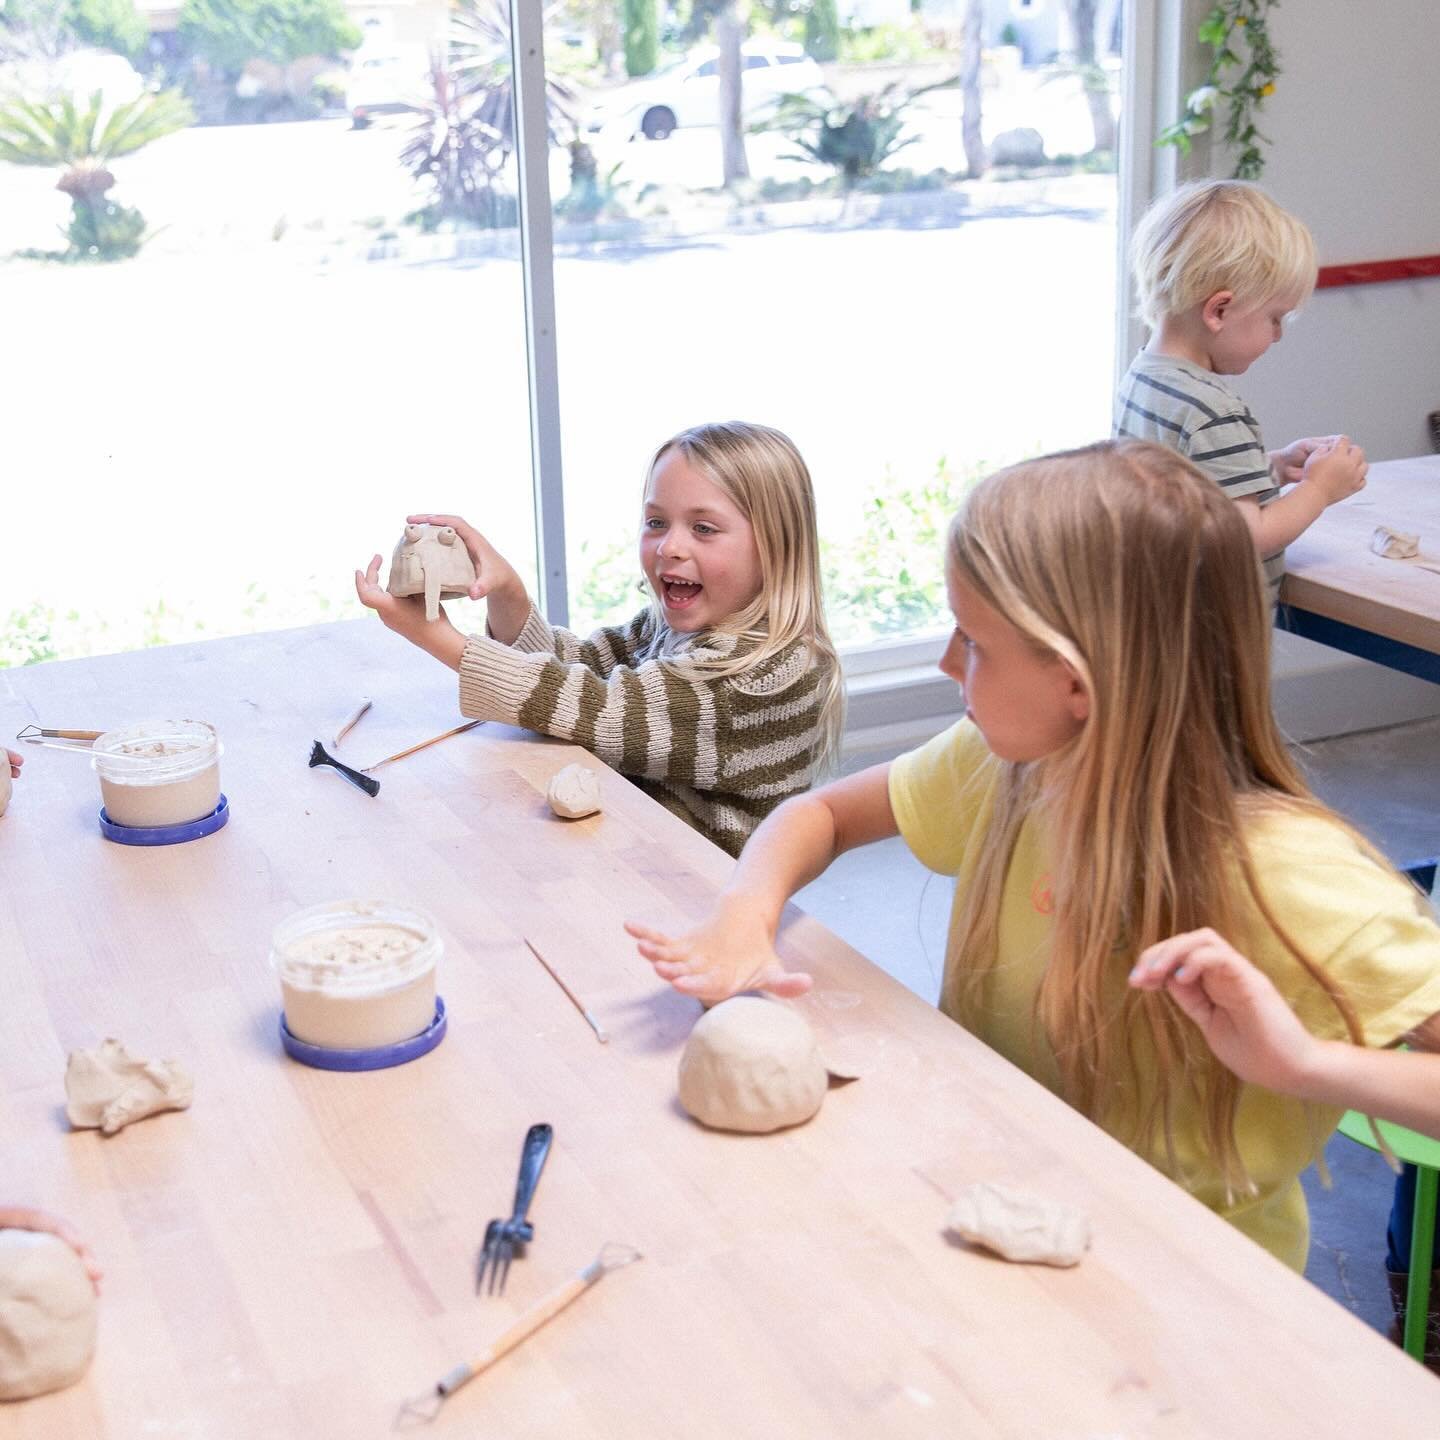 Our summer camps are officially open for enrollment 🎨 Introduce your little one to the world of clay with one of our summer camps, a five day art camp full of creative exploration, clay technique lessons, and a whole lot of fun! See you there 🤍

Re